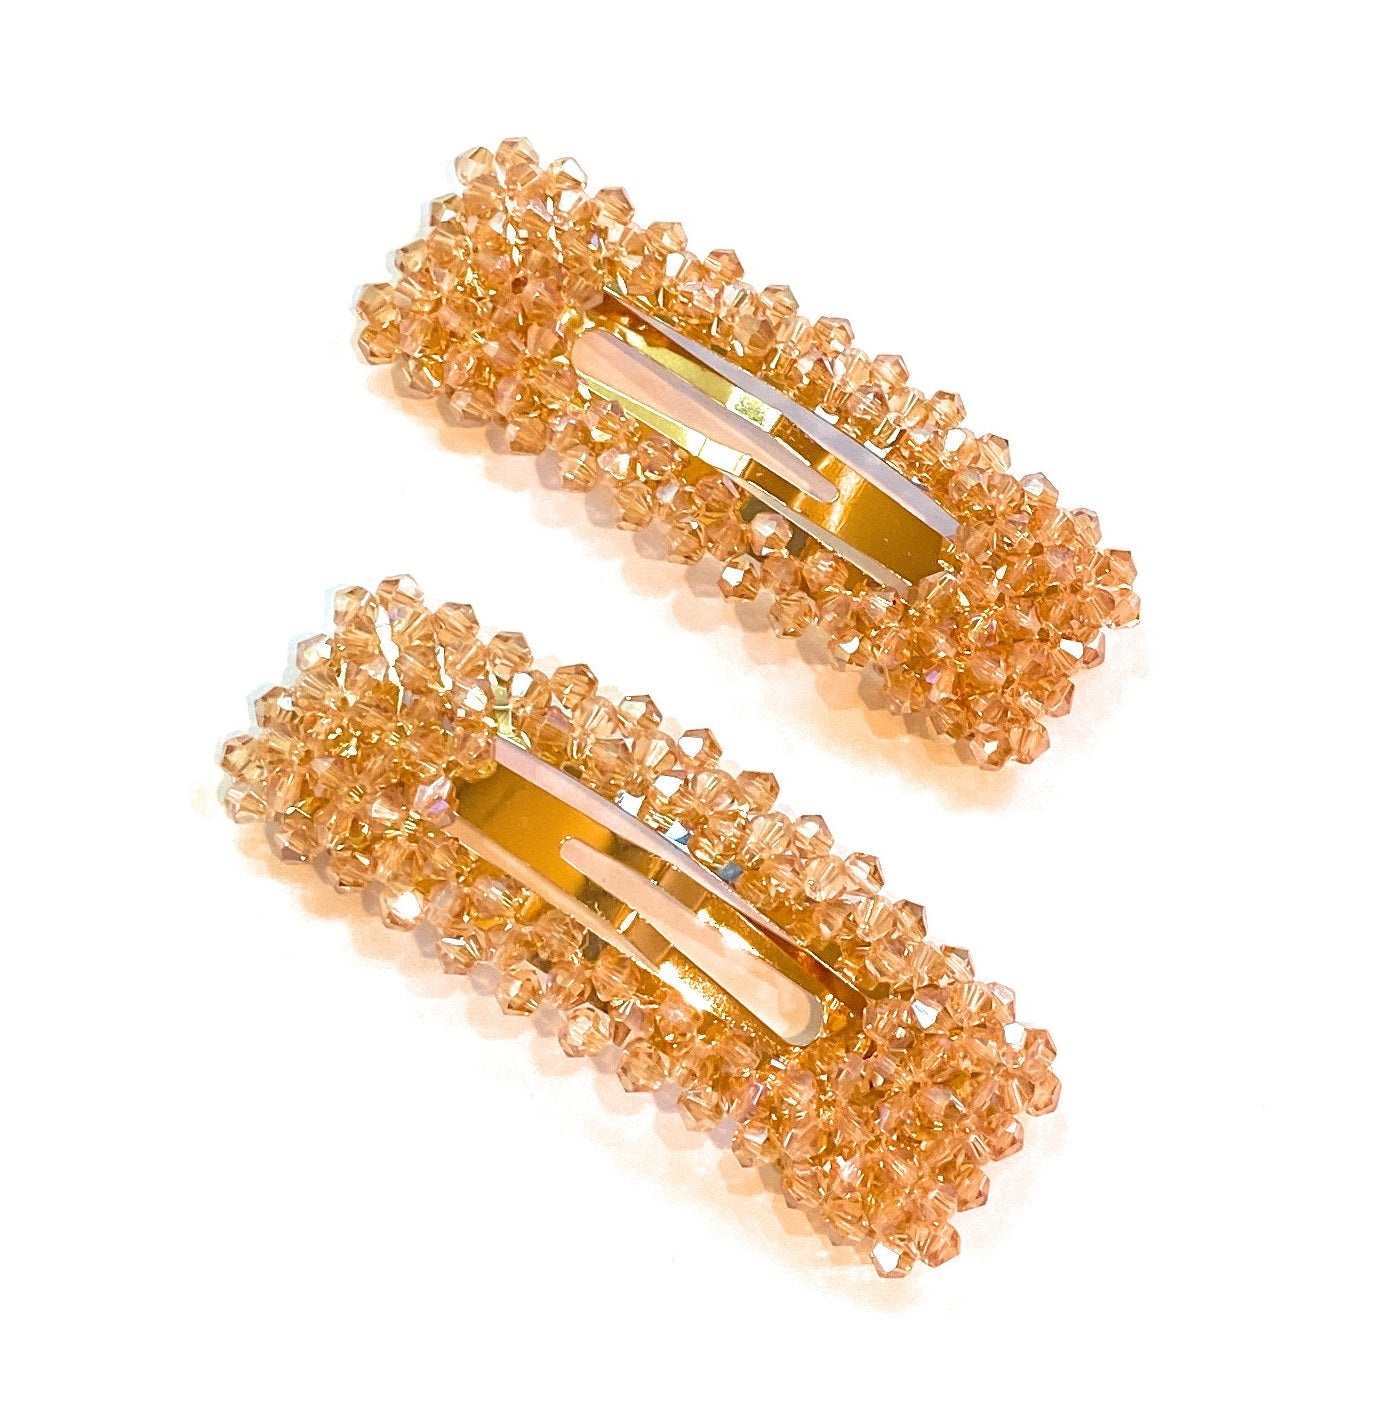 Mia Beauty Snip Snaps in rectangle shape with gold beads